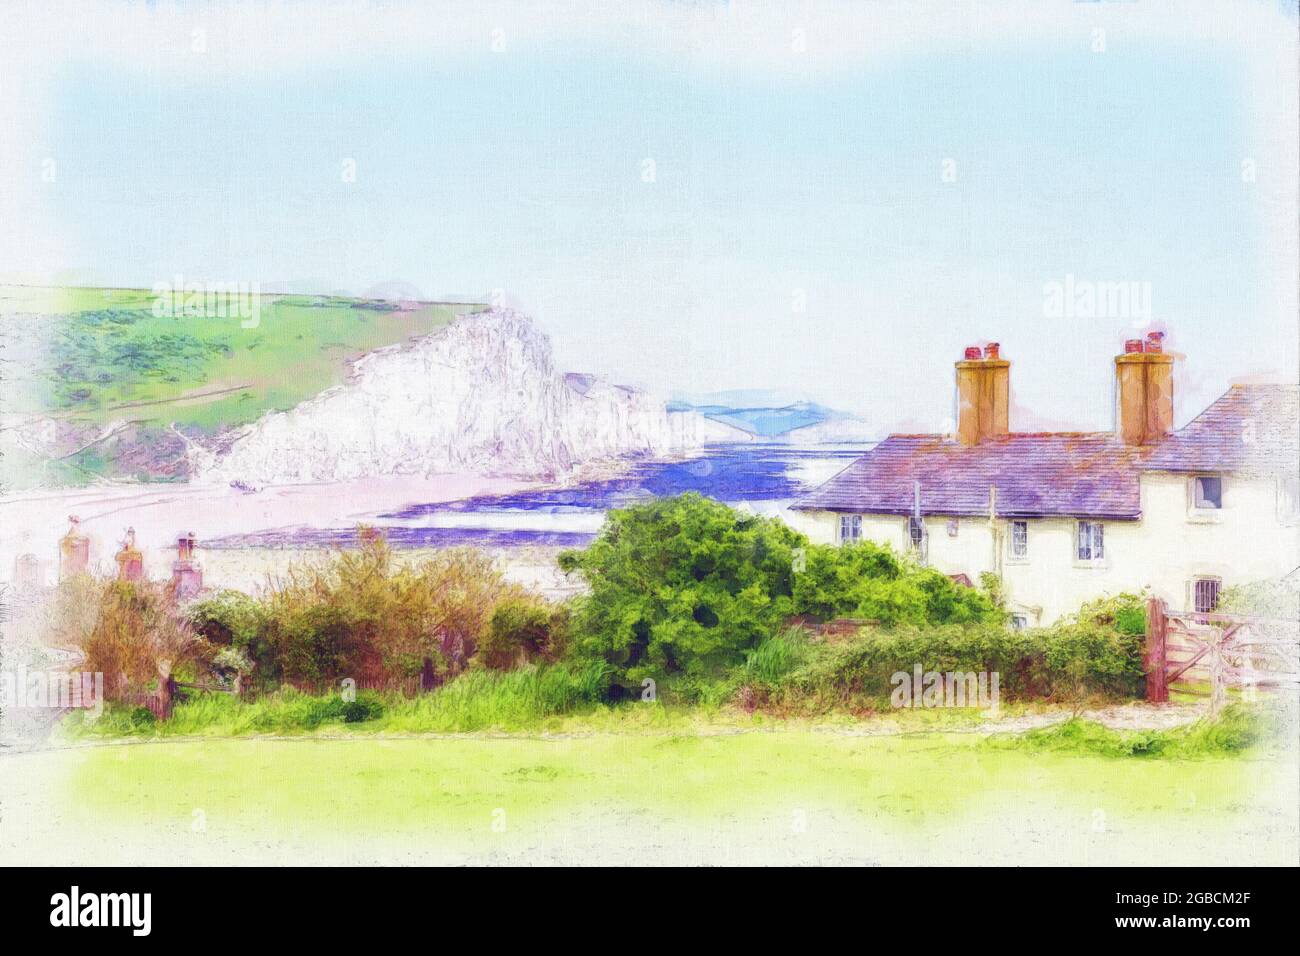 View of the seven sisters cliffs across the coastguard cottages, Cuckmere Haven, East Sussex. Painted effect with added texture. Stock Photo